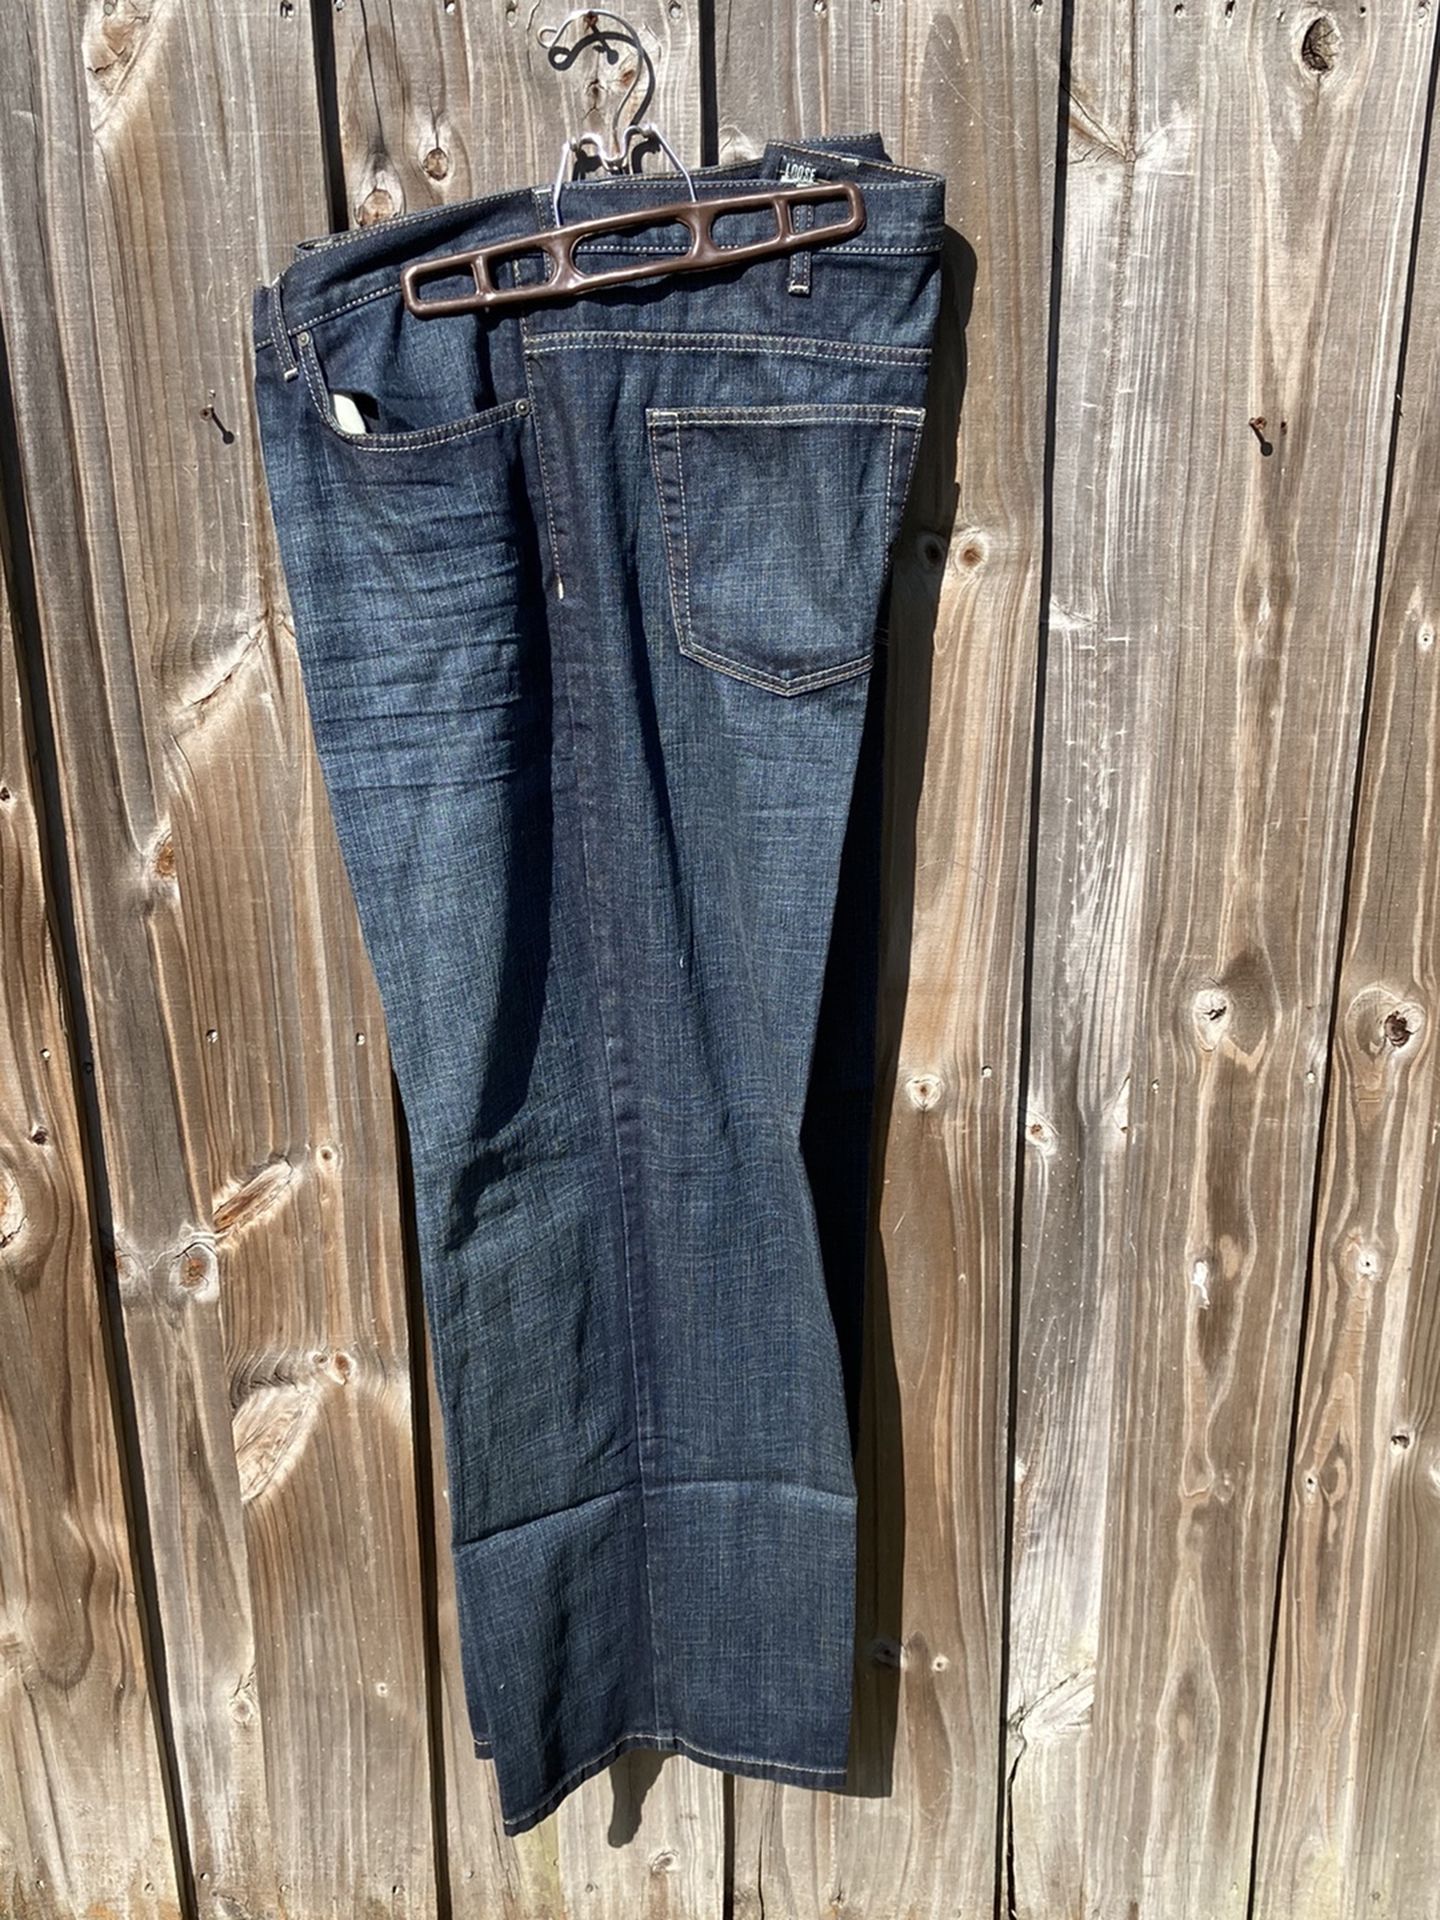 OLD NAVY XL JEANS